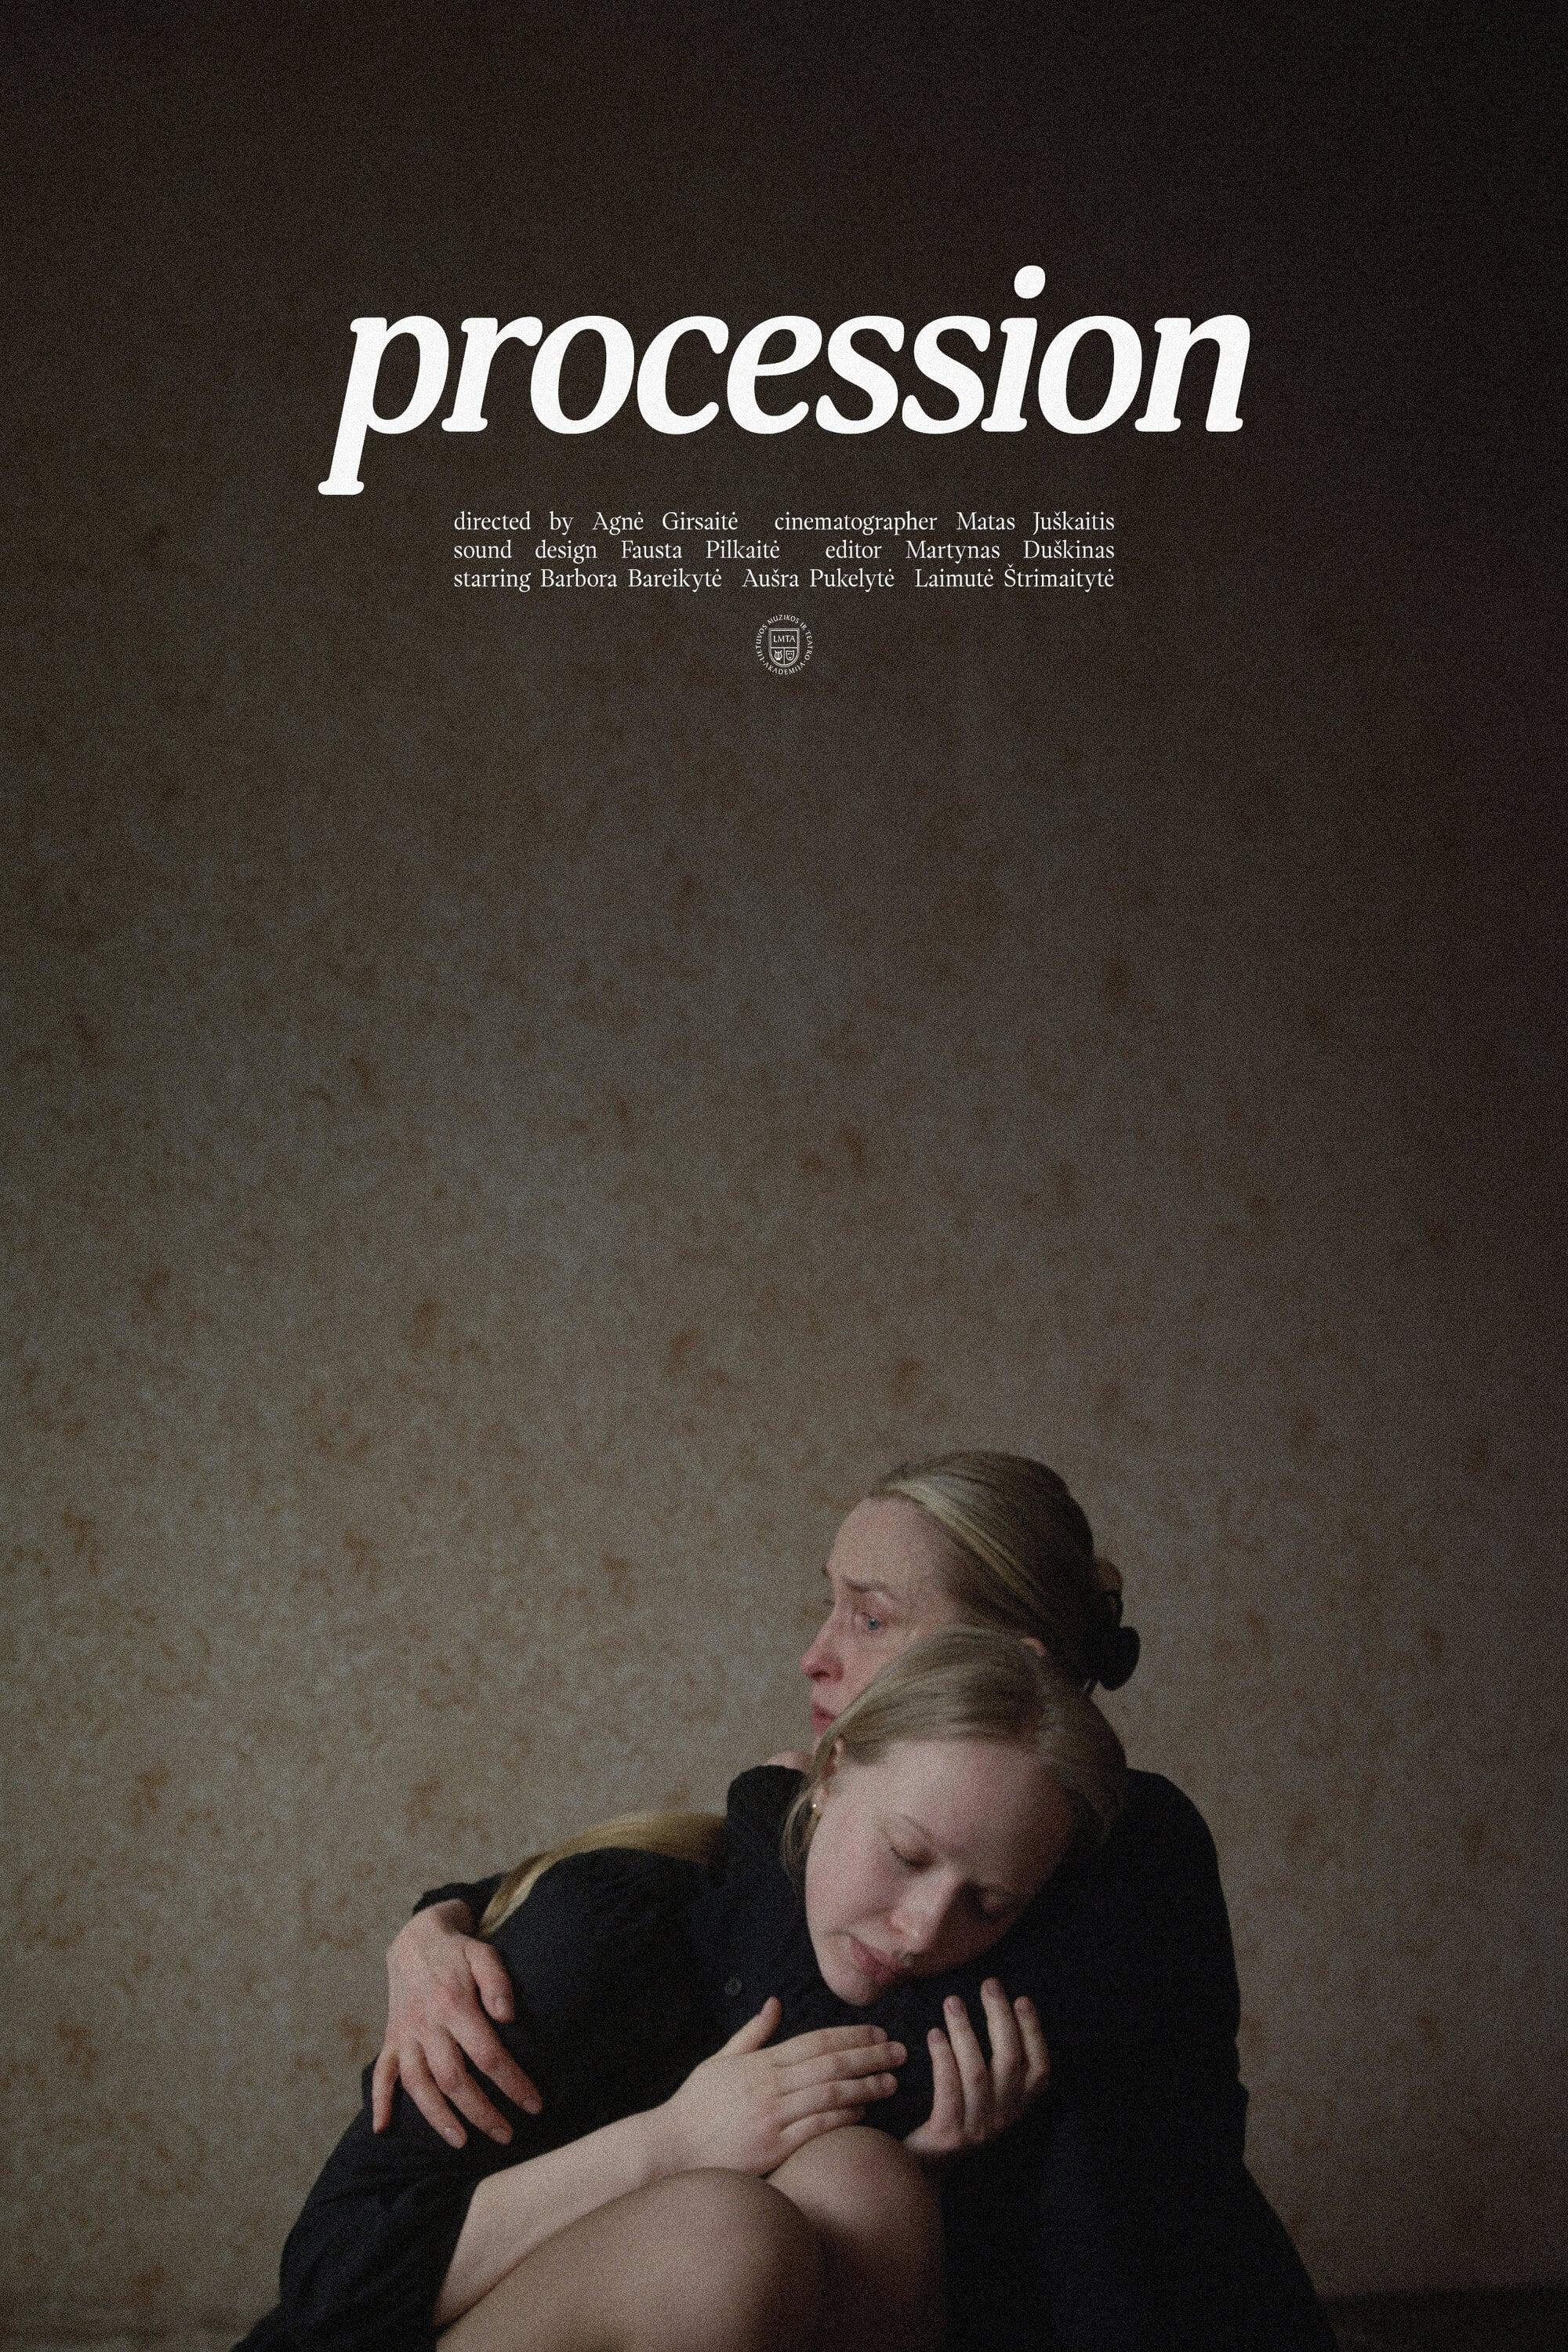 Procession poster